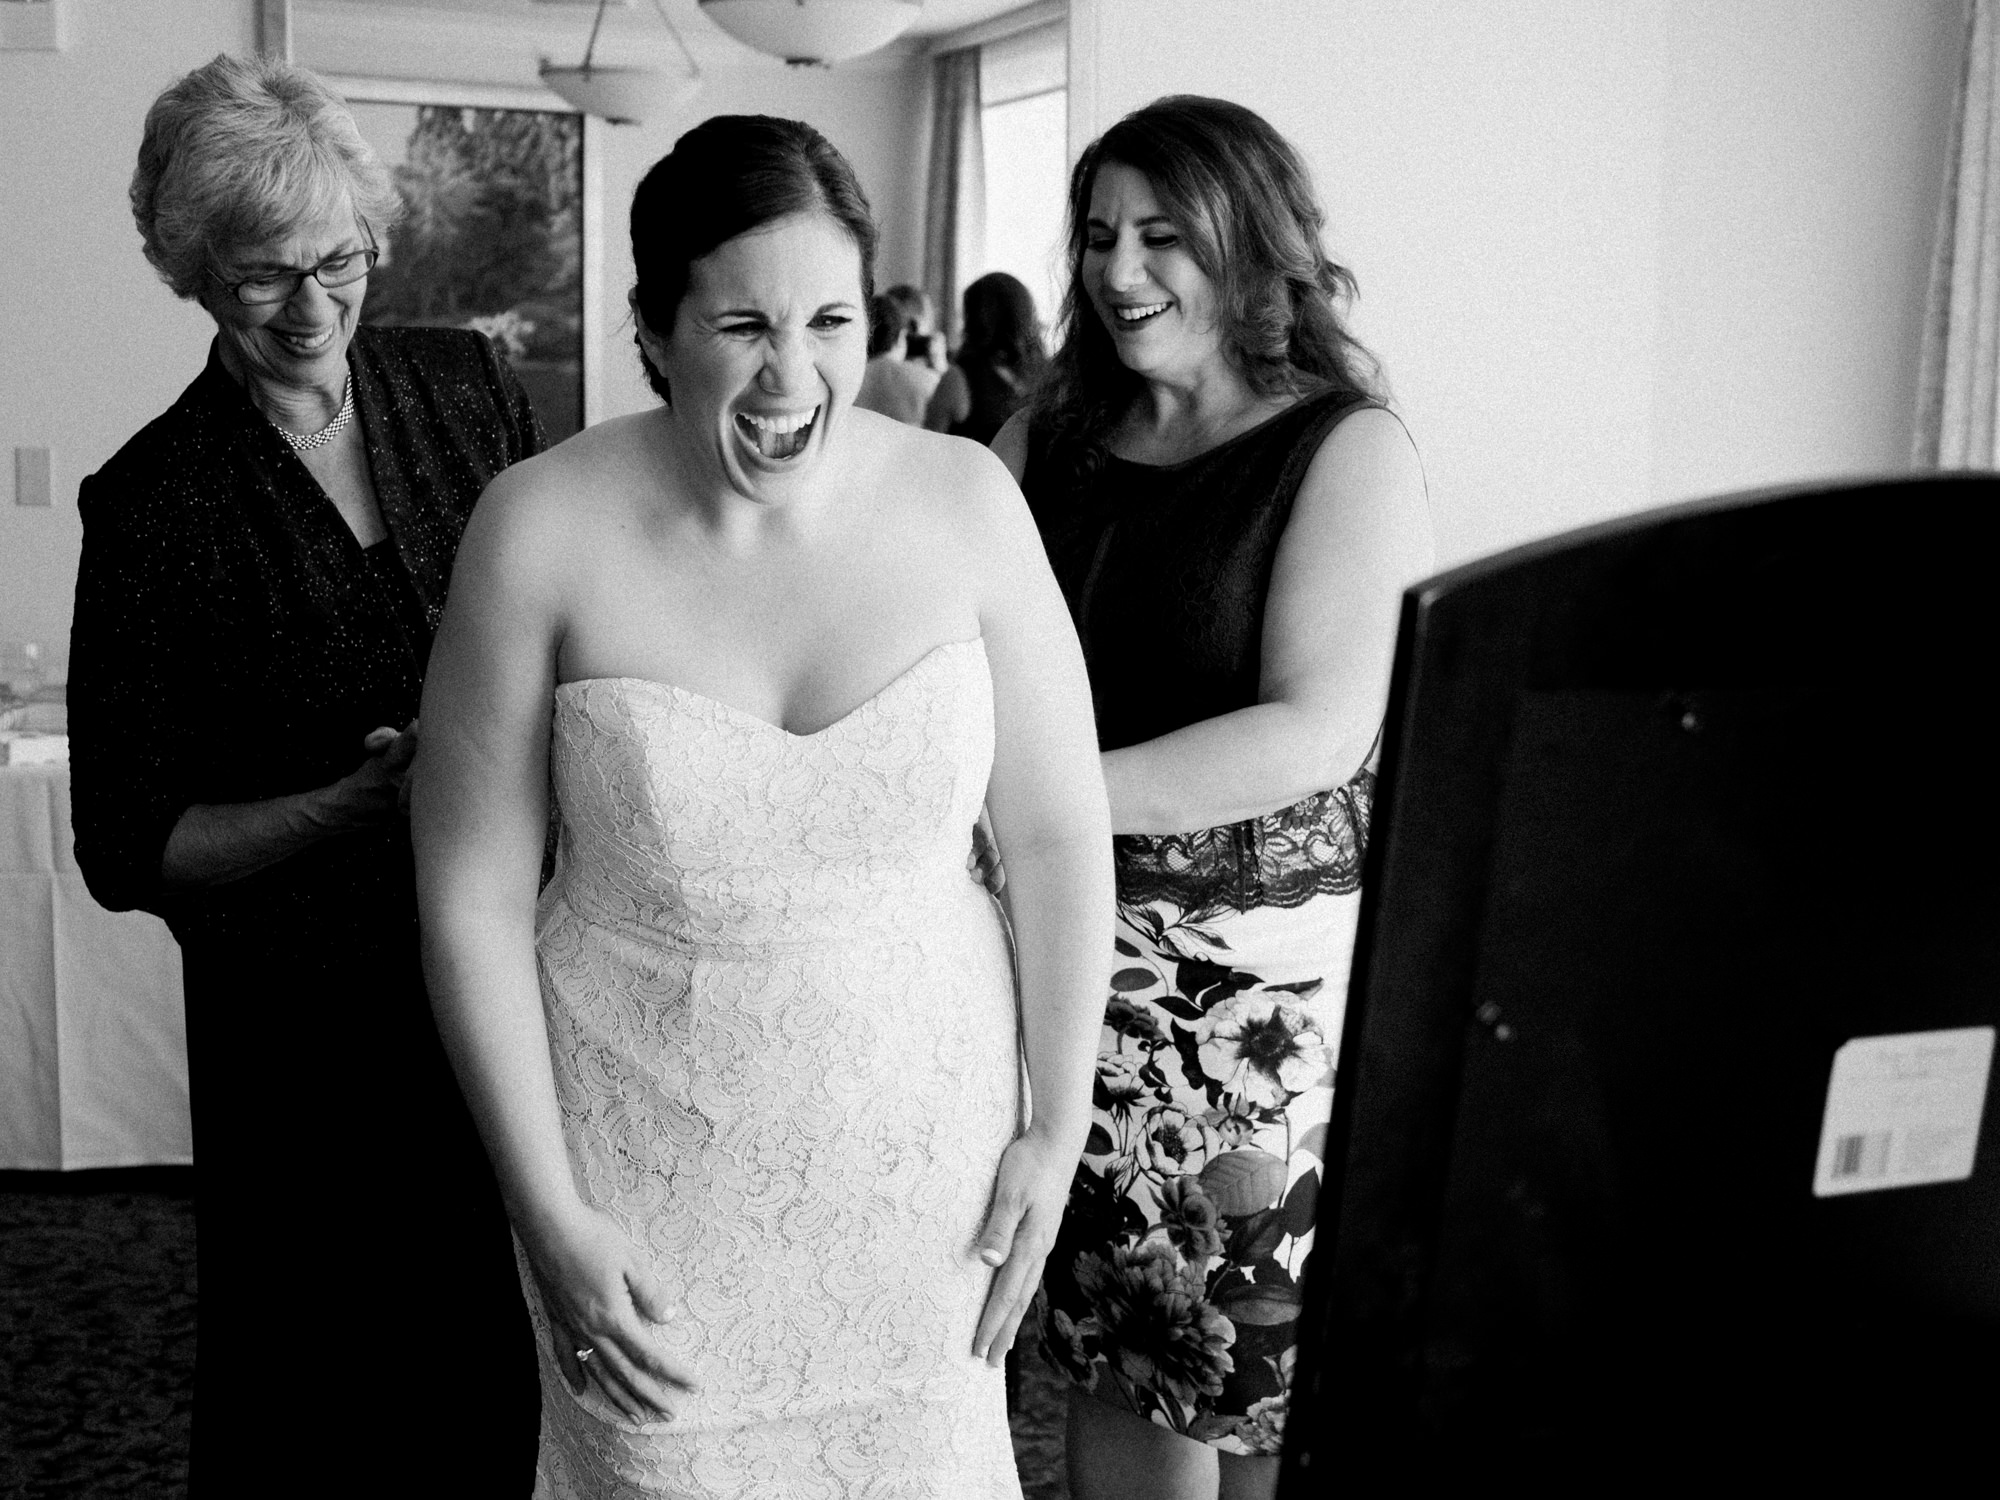 Joelle, the bride, reacts to her gown while getting ready with her sister and mom. They were getting ready at the Seattle Tennis Club, a wedding venue in Seattle, WA. Photo by Seattle Wedding Photographers Jennifer Tai Photo Artistry.